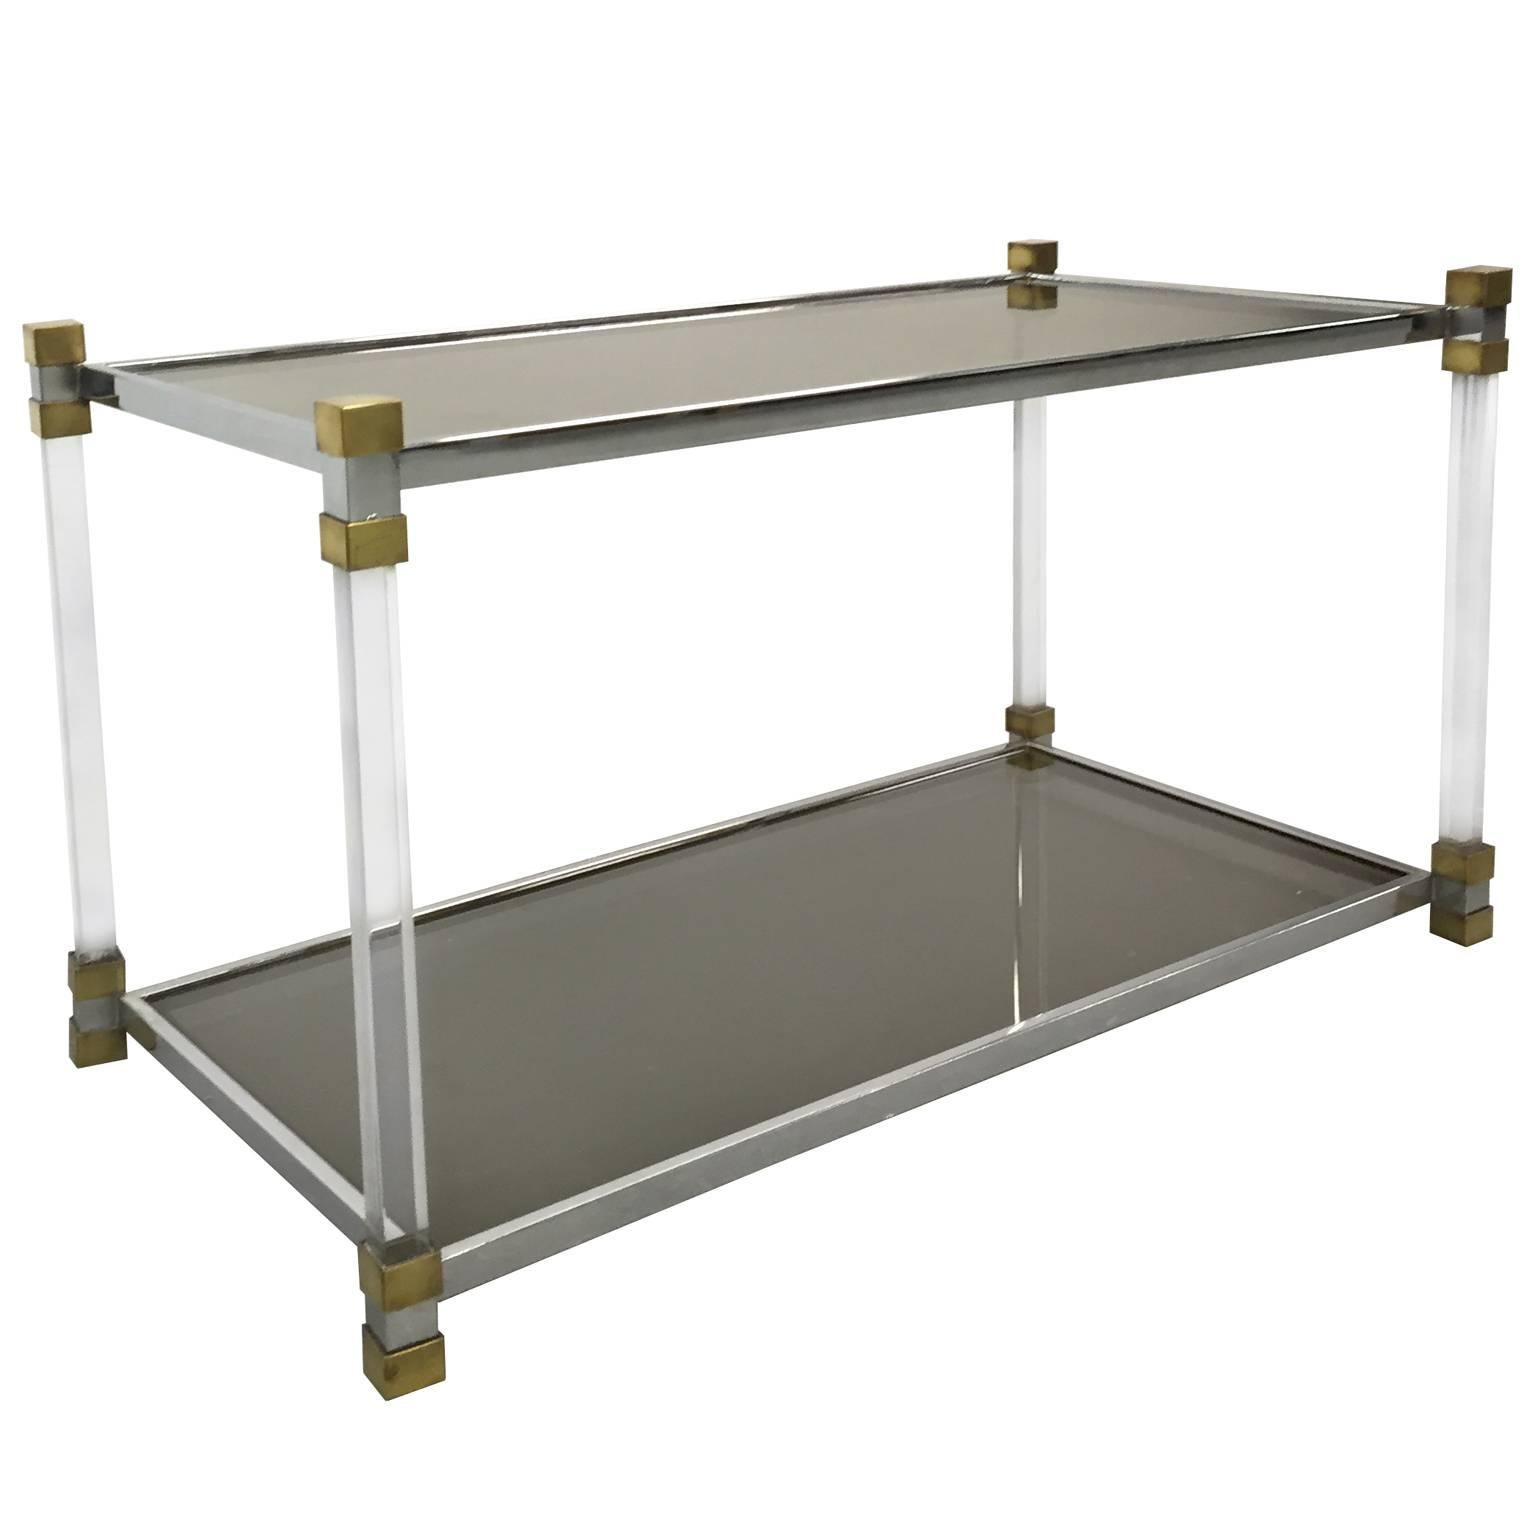 Chrome and Lucite two-tier side table with brass details and smoked glass top, French, 1970s.  
 